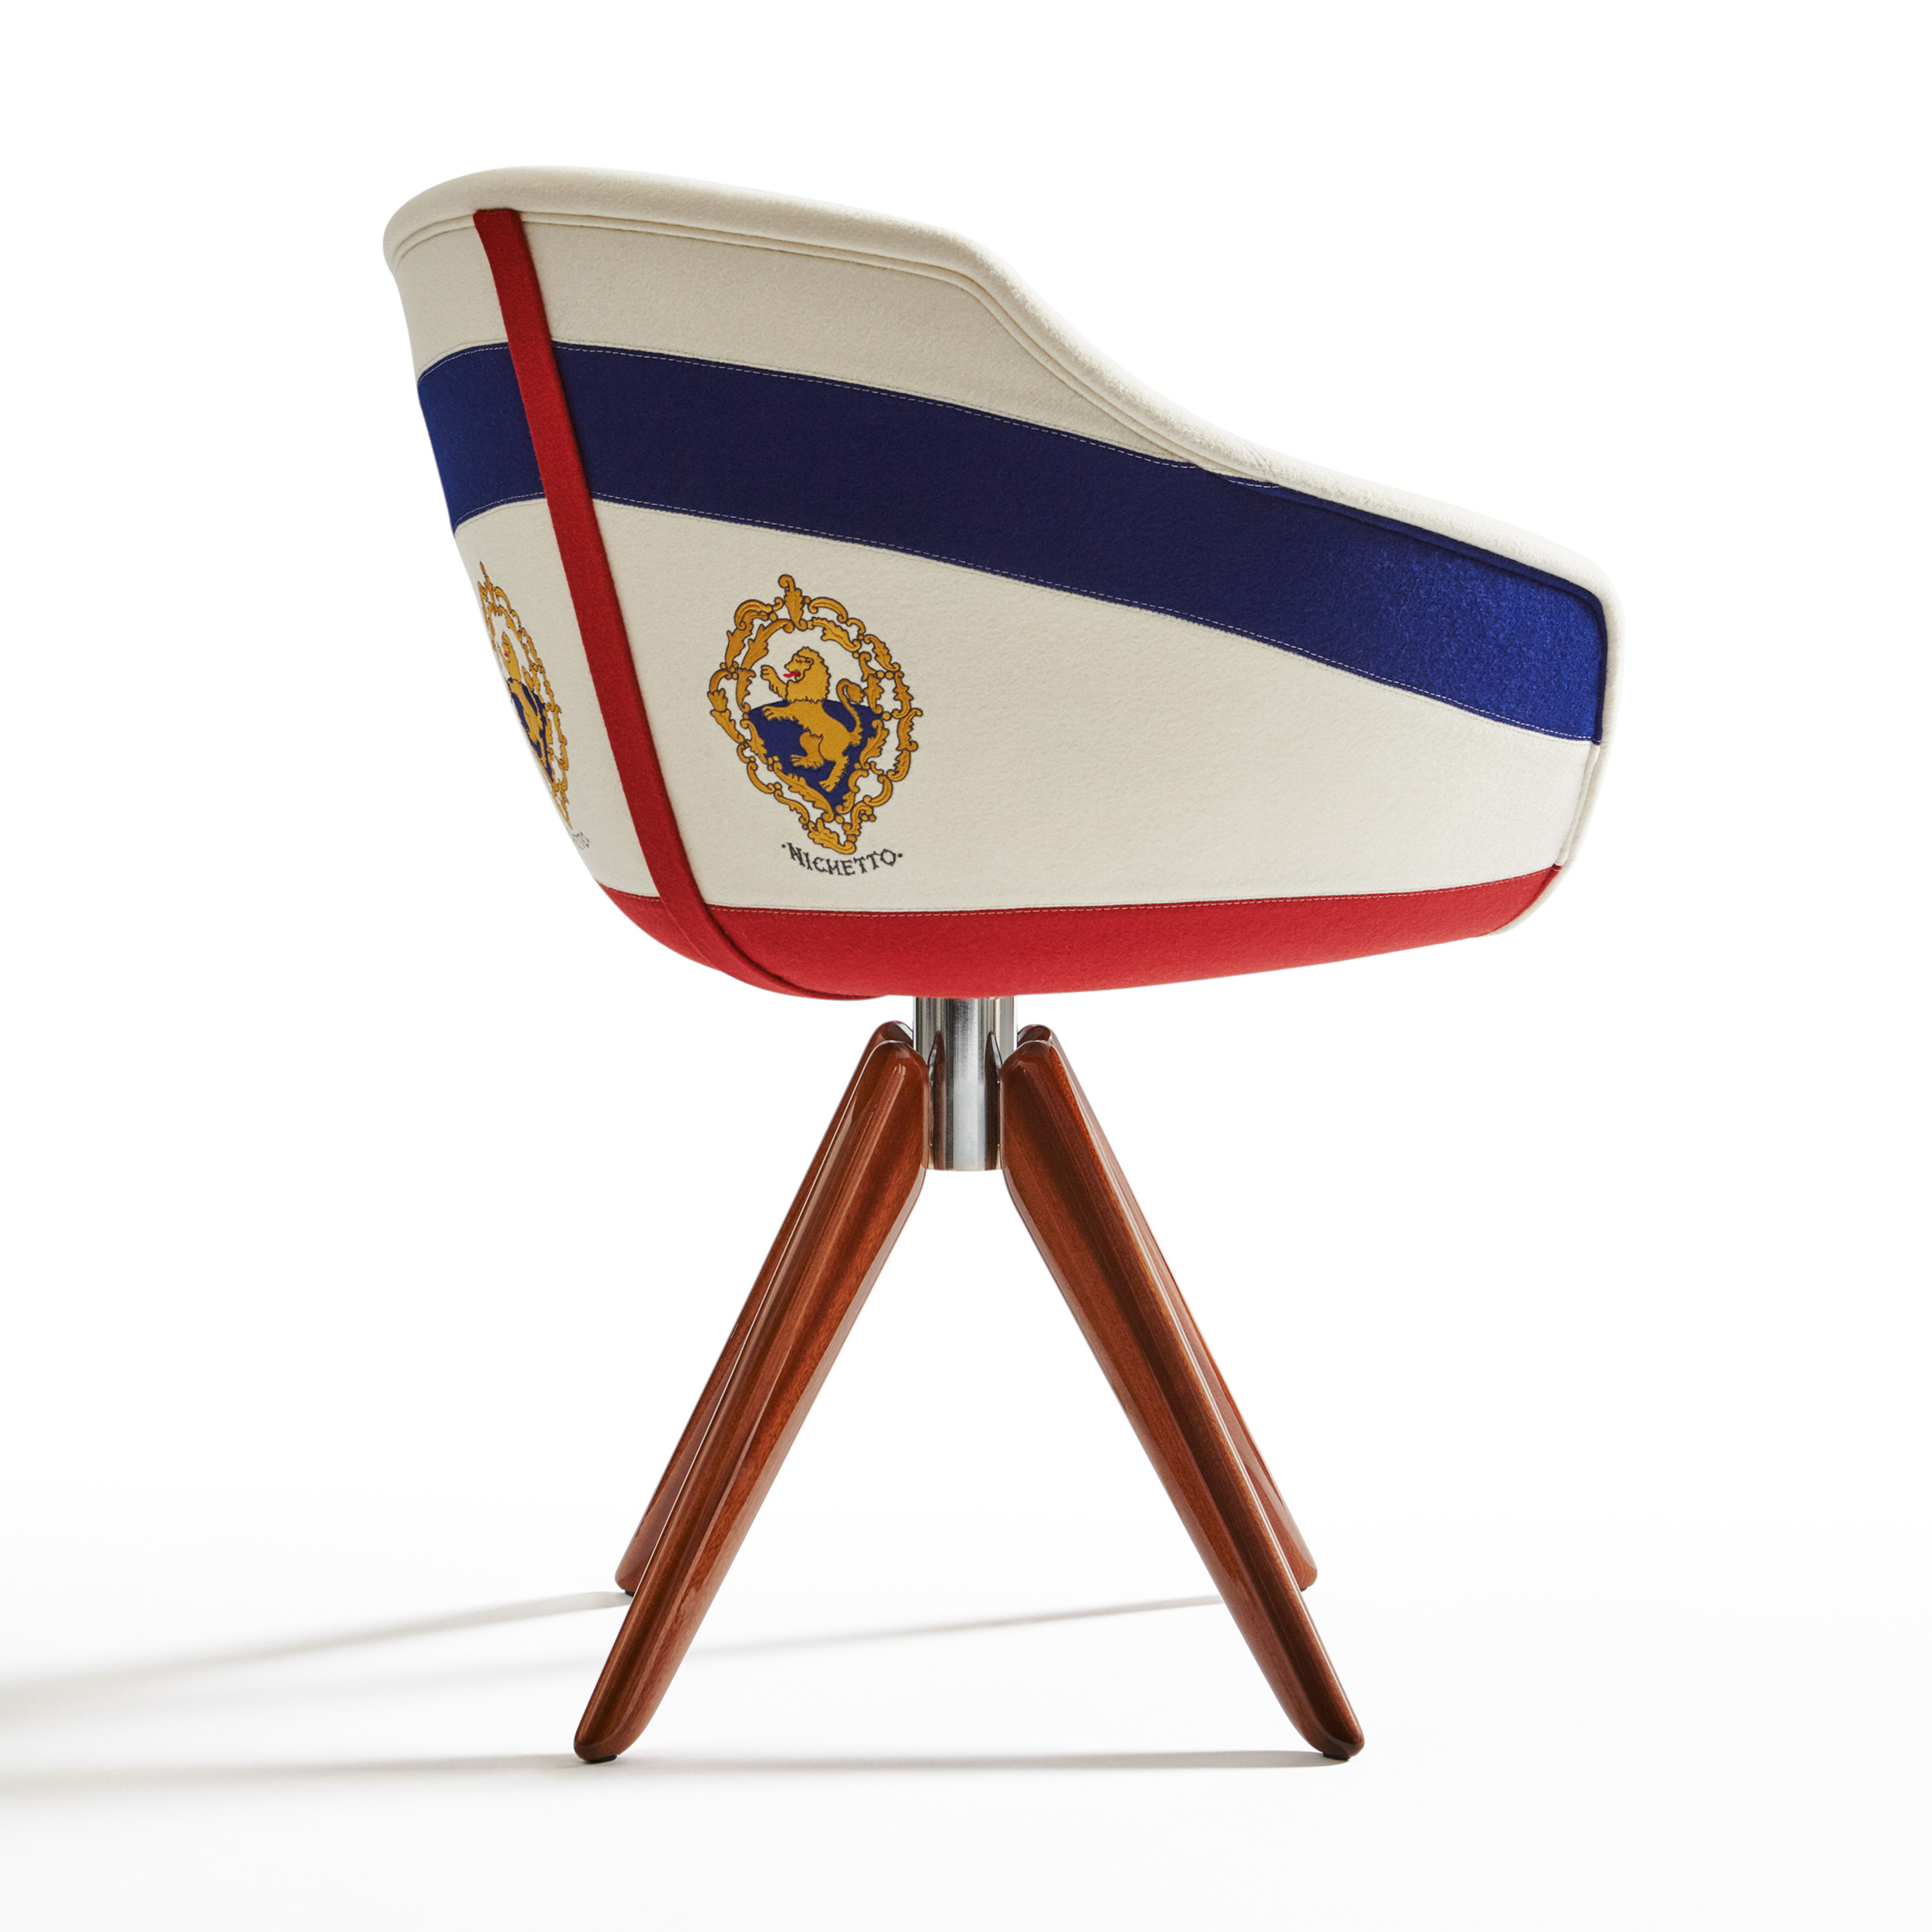 Canal Chair by Luca Nichetto for Moooi